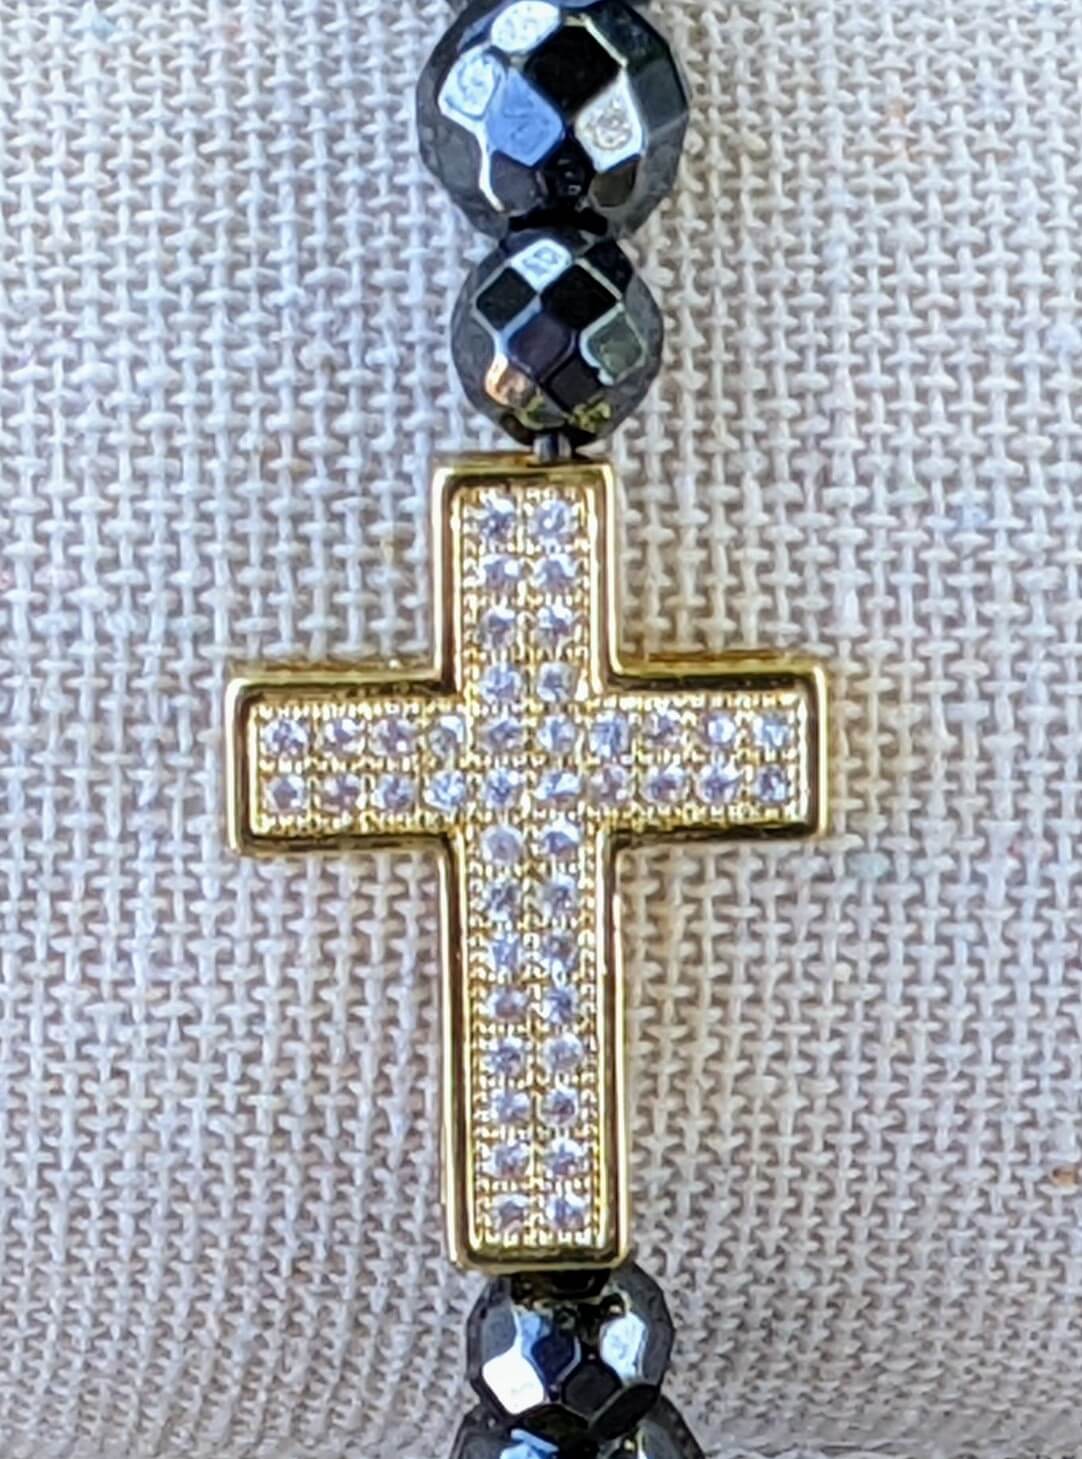 Large Cross (Gold Plated) with Natural Hematite Beads